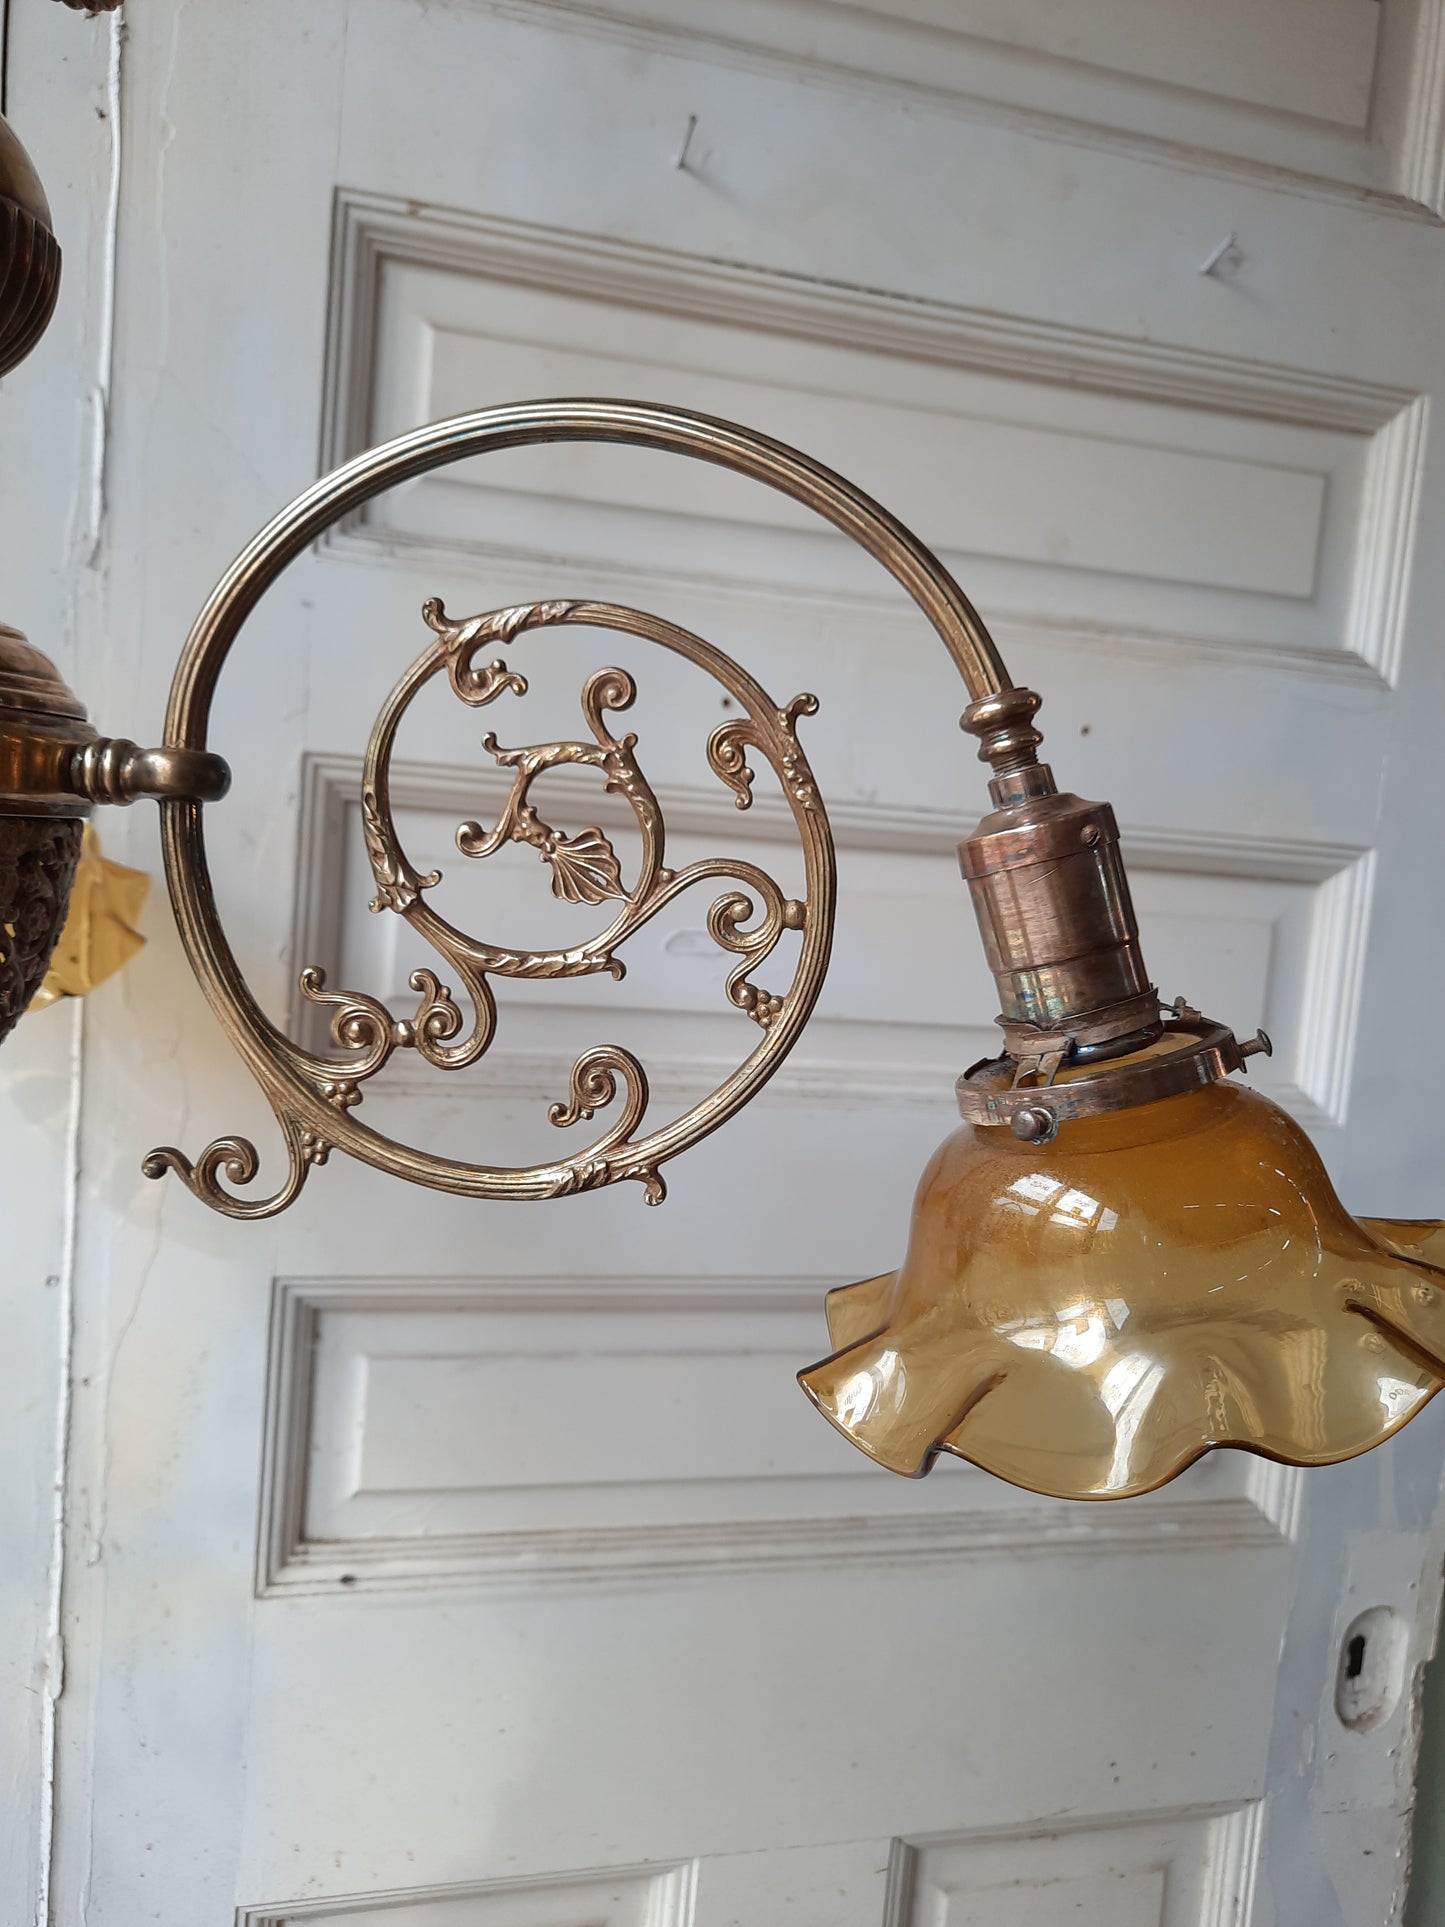 Early Brass and Yellow Glass Electric Chandelier, Large Curved Arm Ornate Chandelier